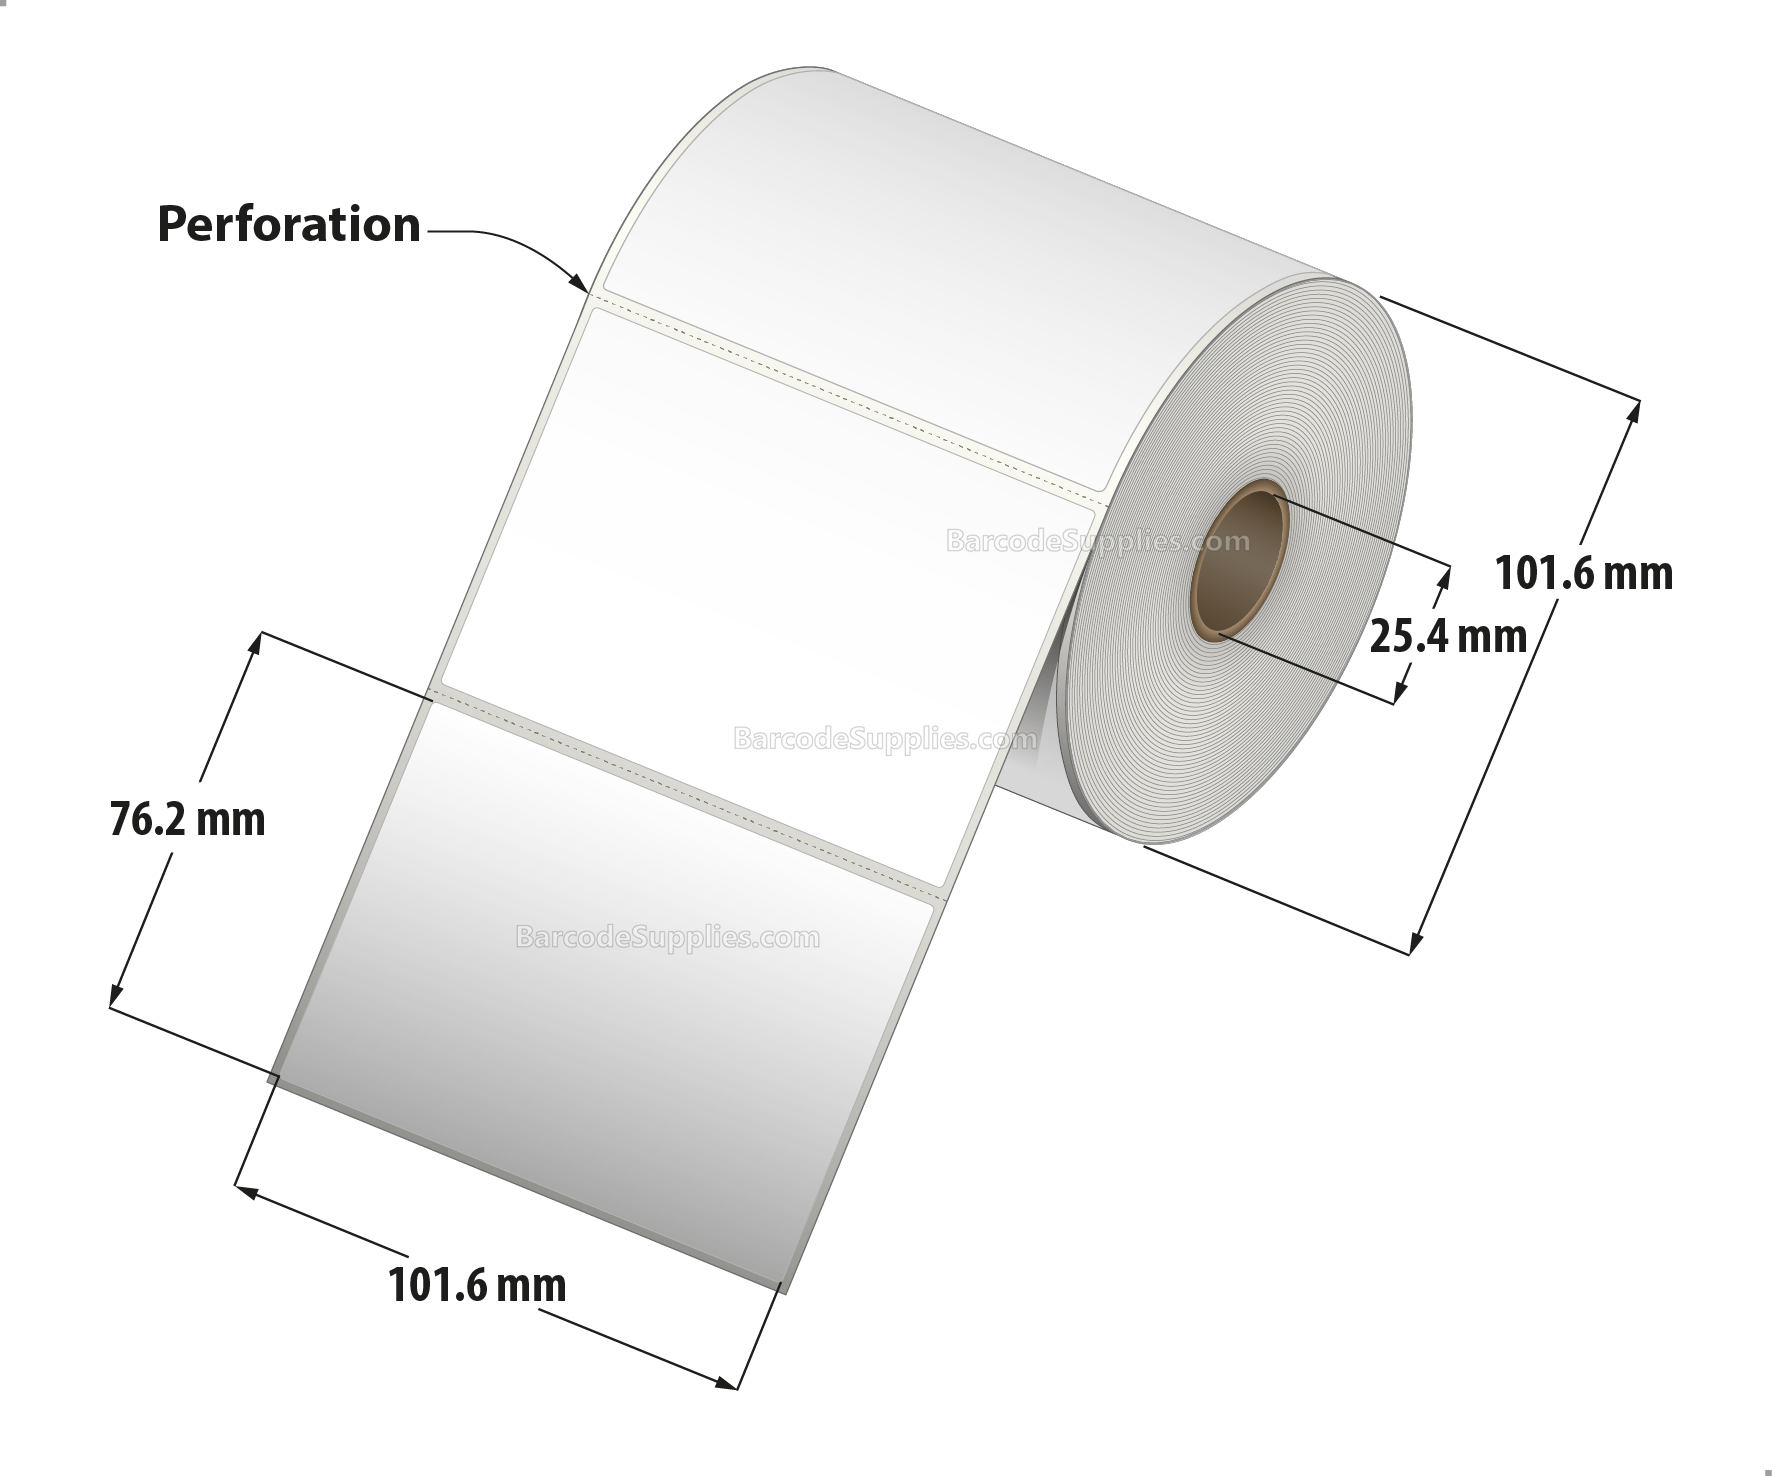 4 x 3 Direct Thermal White Labels With Rubber Adhesive - Perforated - 500 Labels Per Roll - Carton Of 12 Rolls - 6000 Labels Total - MPN: RDT4-400300-1P